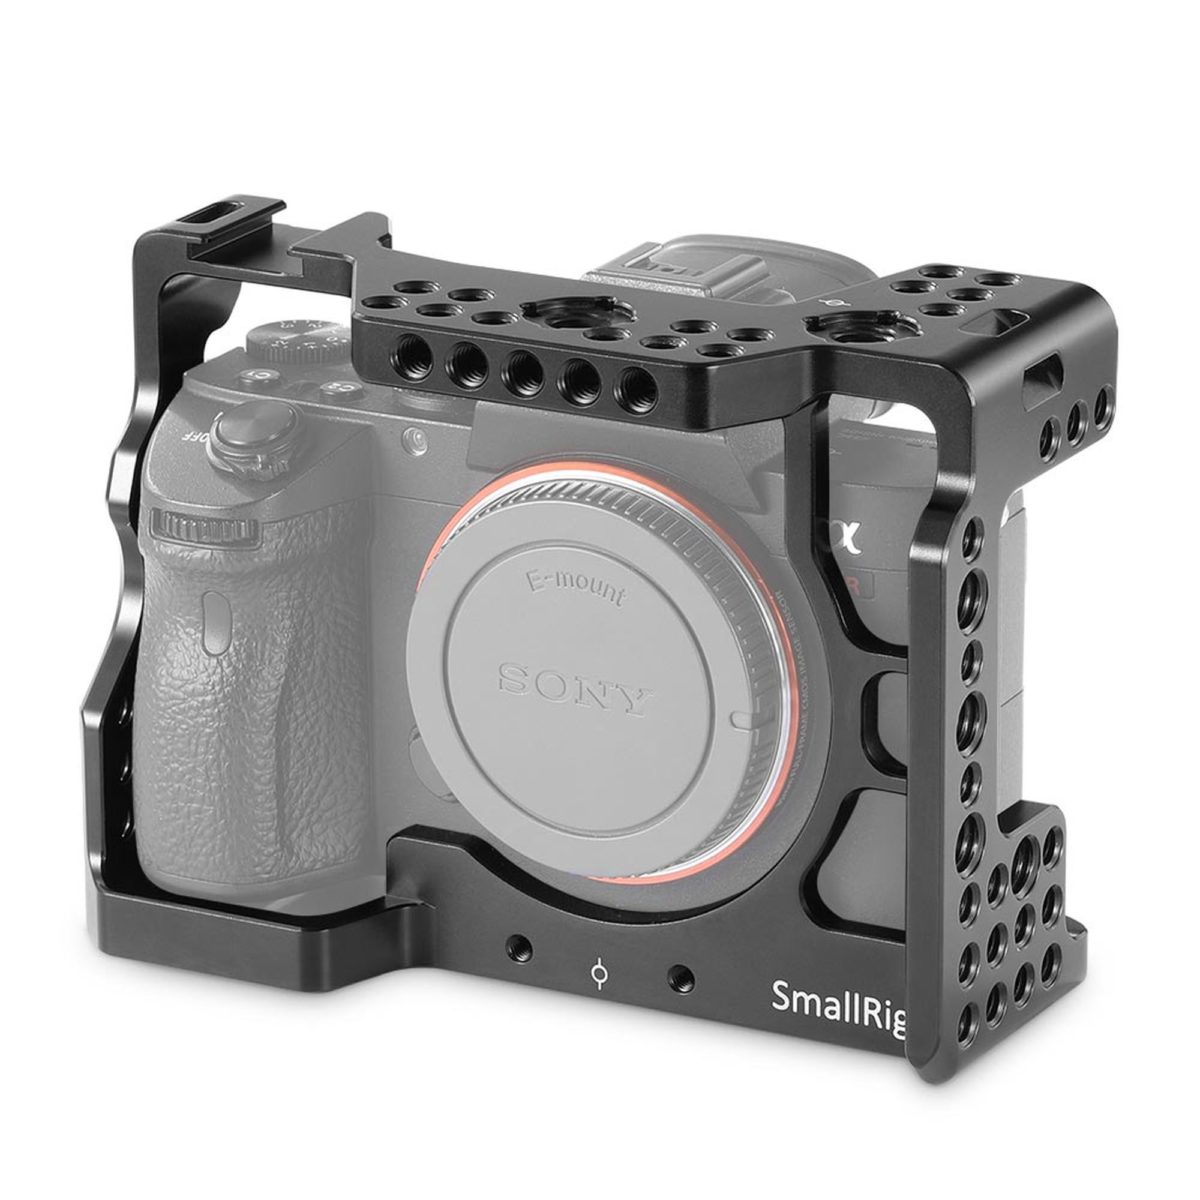 SmallRig Cage for Sony A7RIII/A7M3/A7III mieten ab 2,21 € am Tag